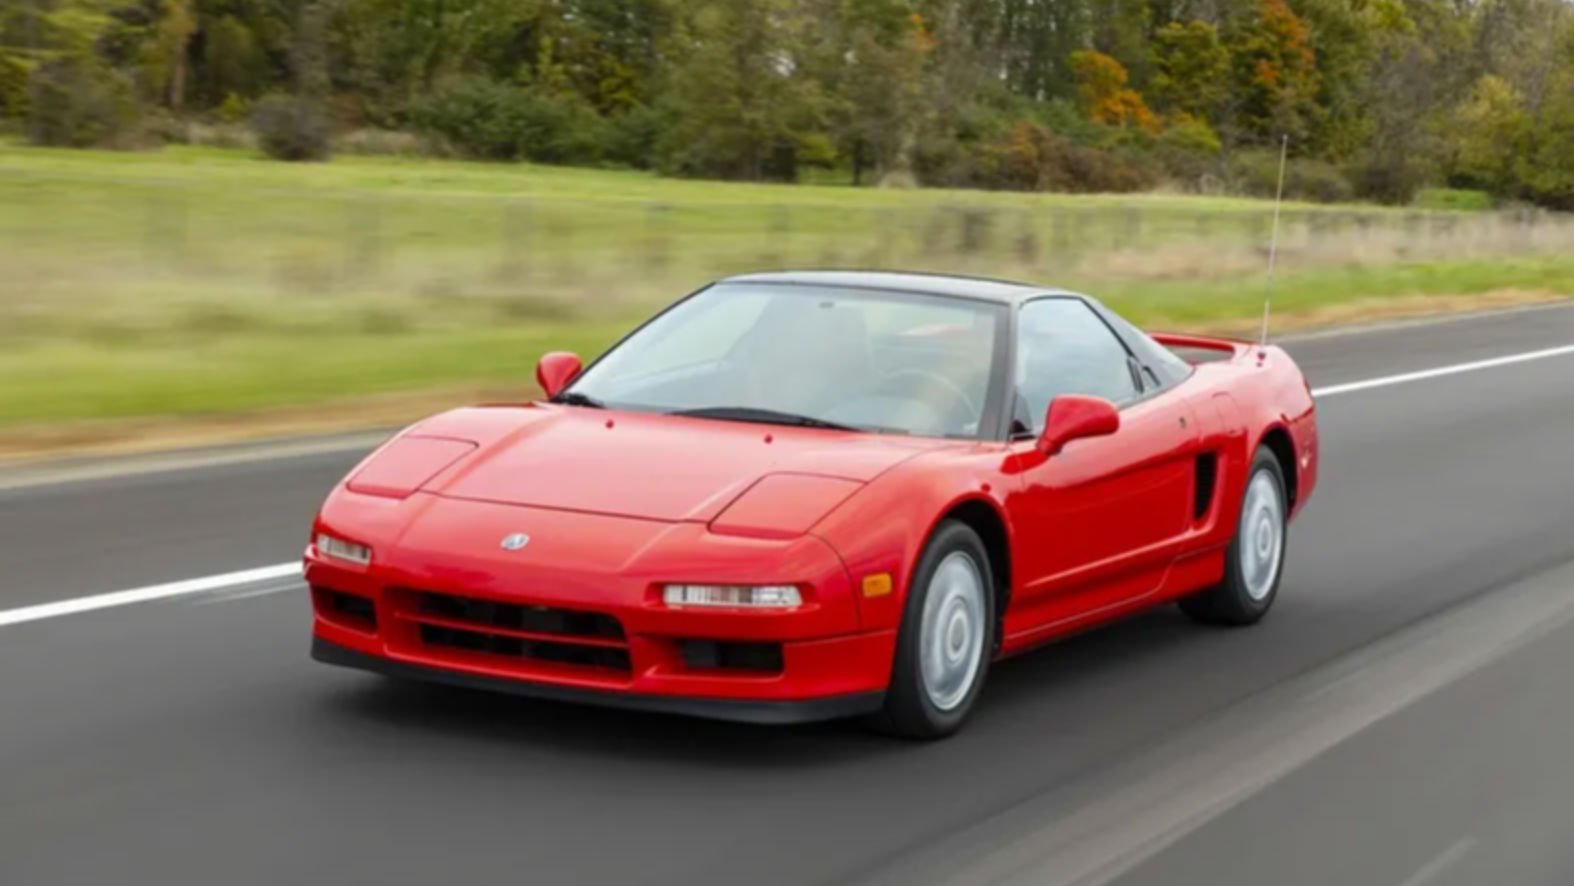 Classic Car On DubiCars: Acura NSX Review – A Legend That Redefined Supercar Standards